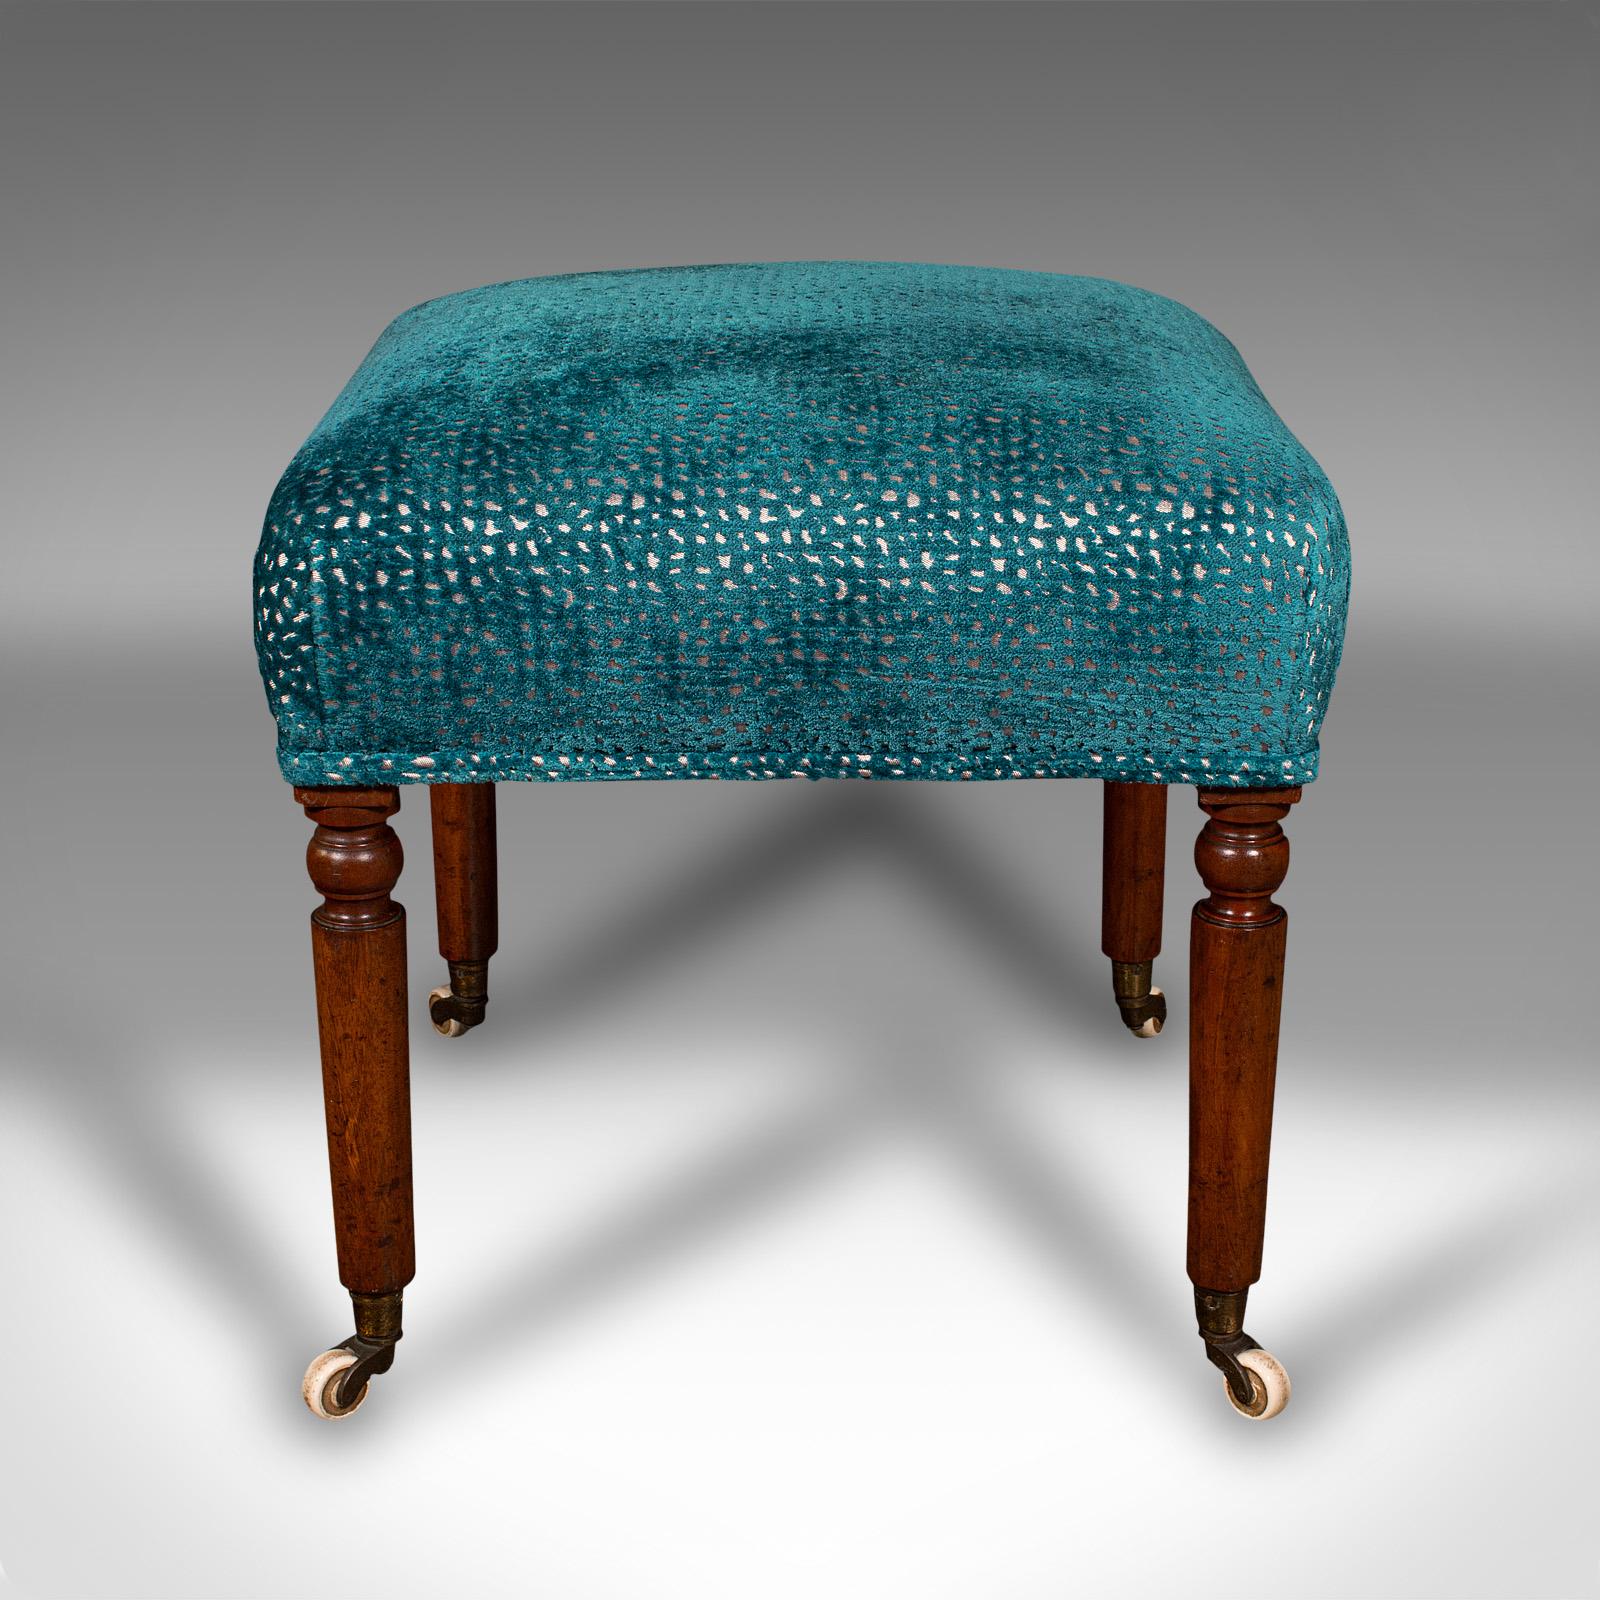 This is an antique dressing stool. An English, mahogany and chenille upholstered footstool, dating to the Regency period, circa 1820.

Graced with superb colour and a fine, tactile upholstery
Displays a desirable aged patina and in very good